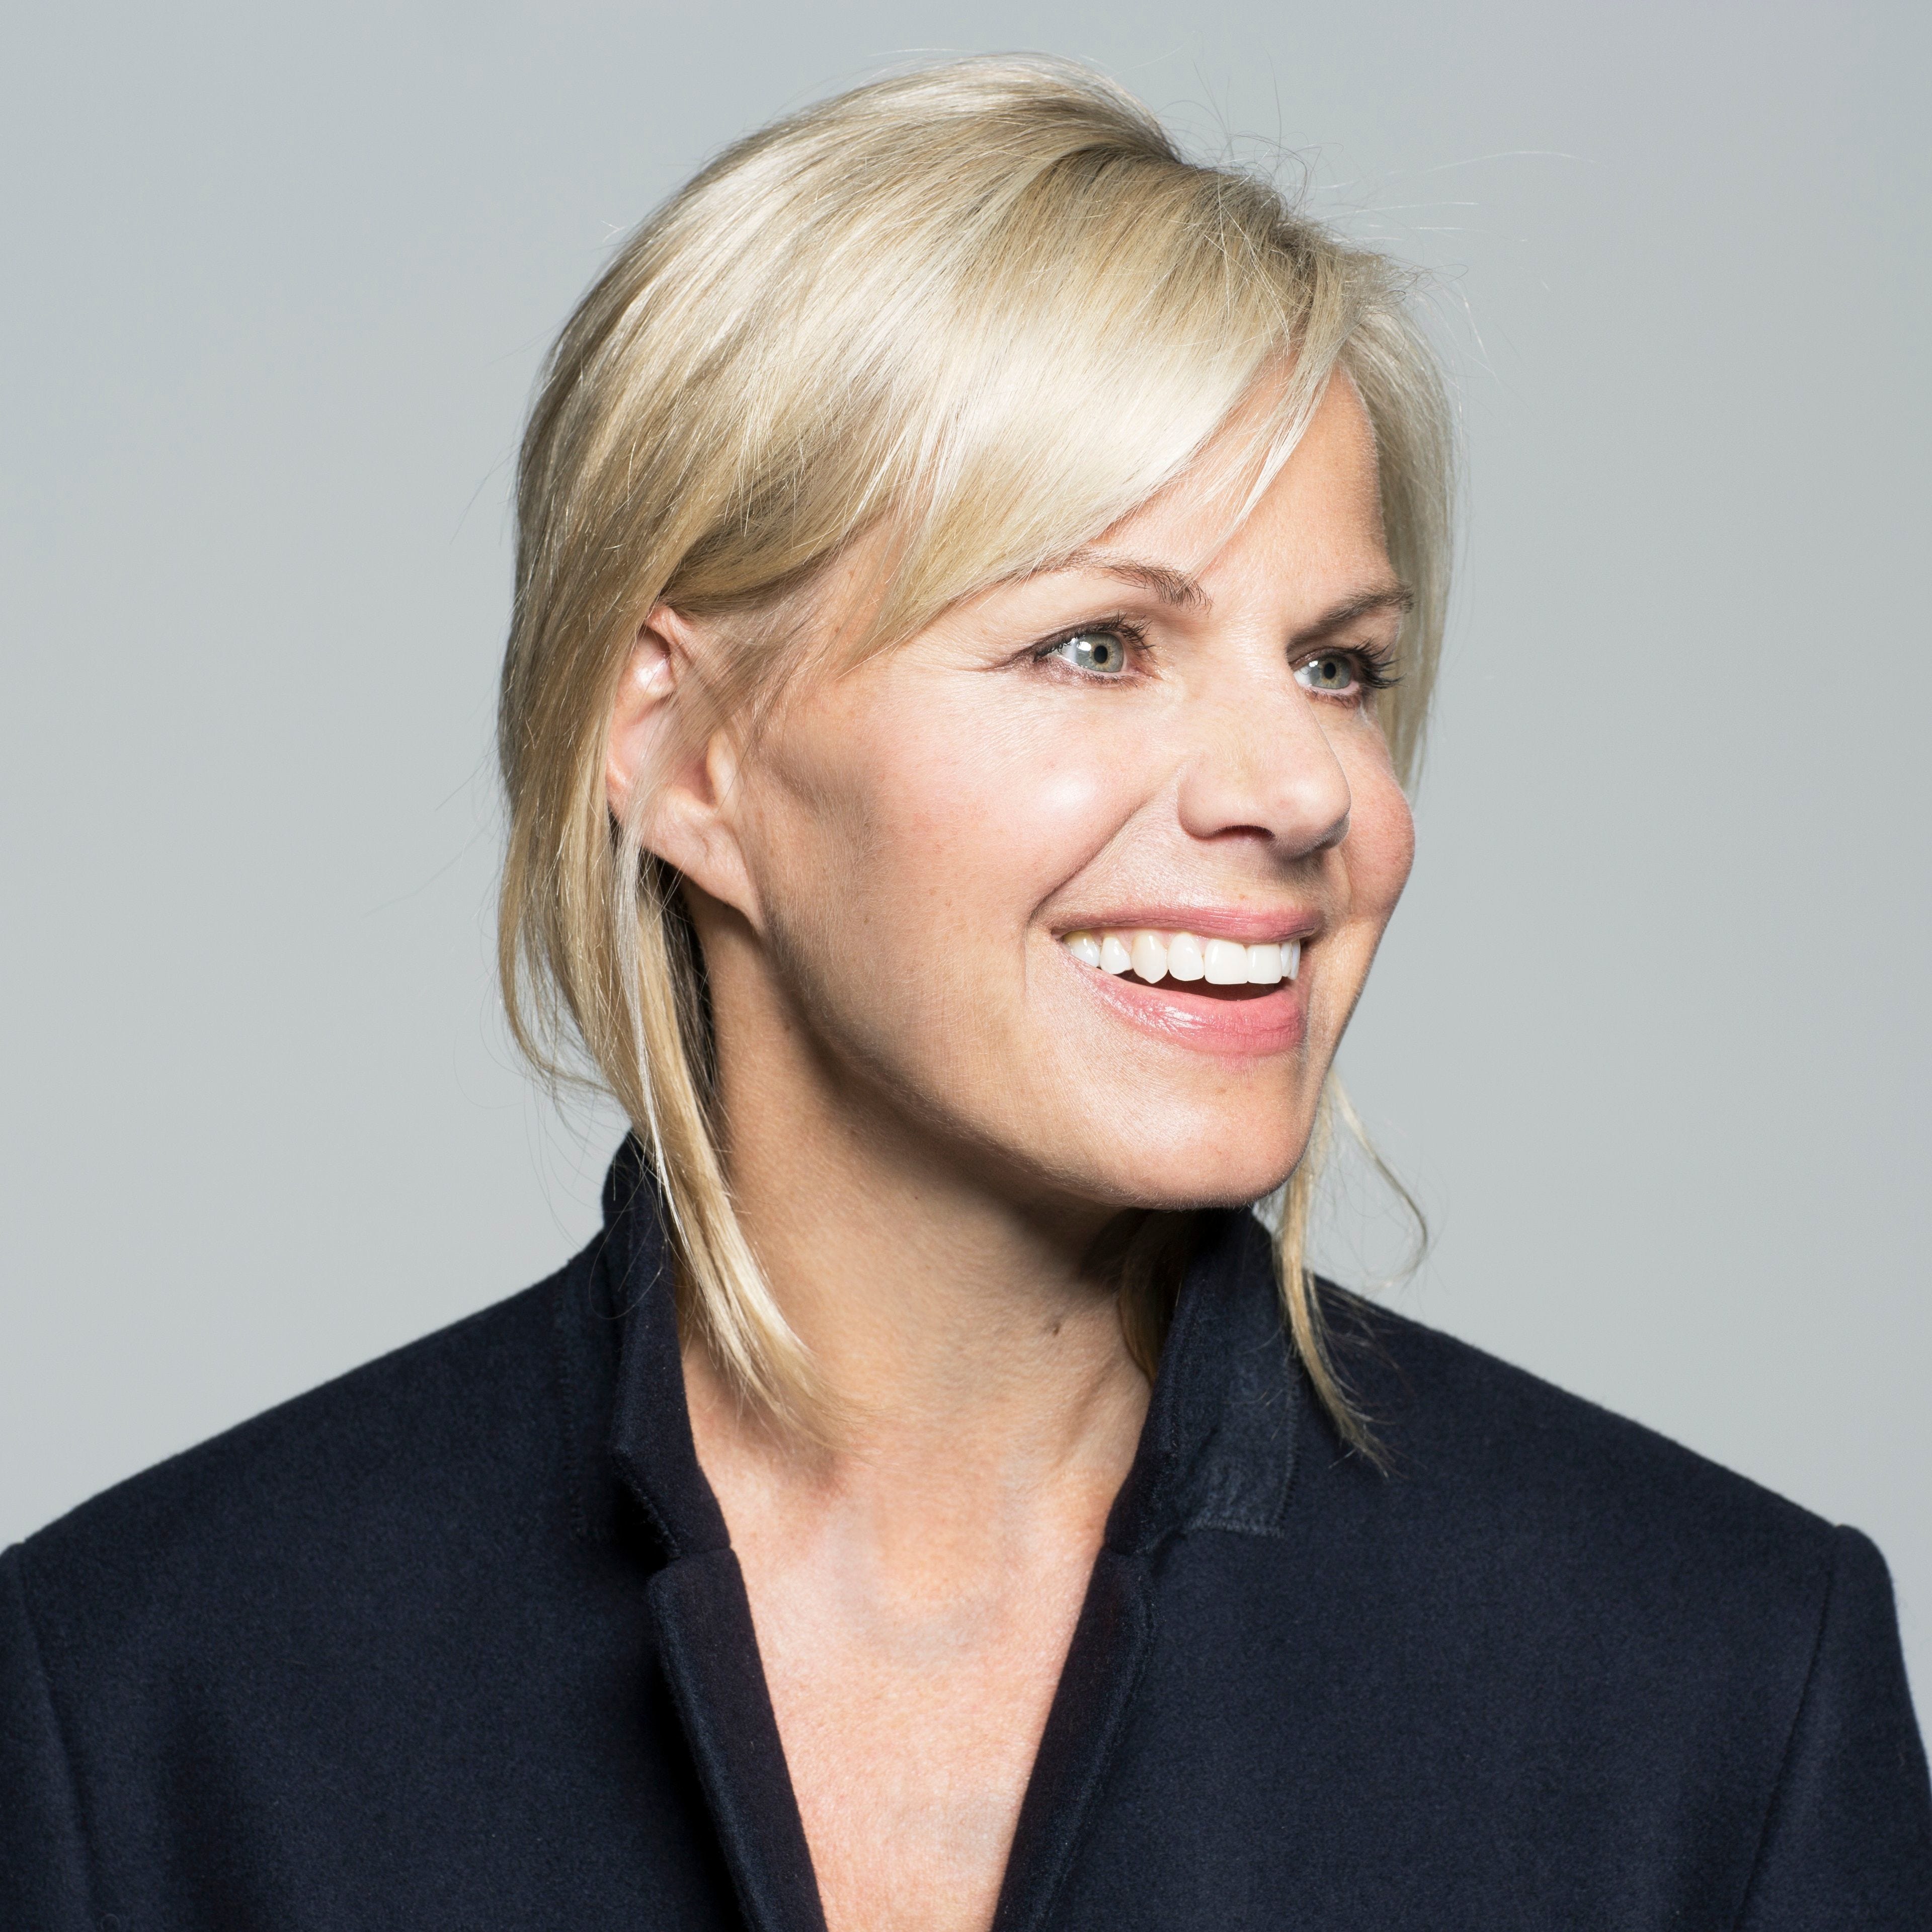 Gretchen Carlson says the nation faces a watershed moment in its struggle with sexual harrassment.